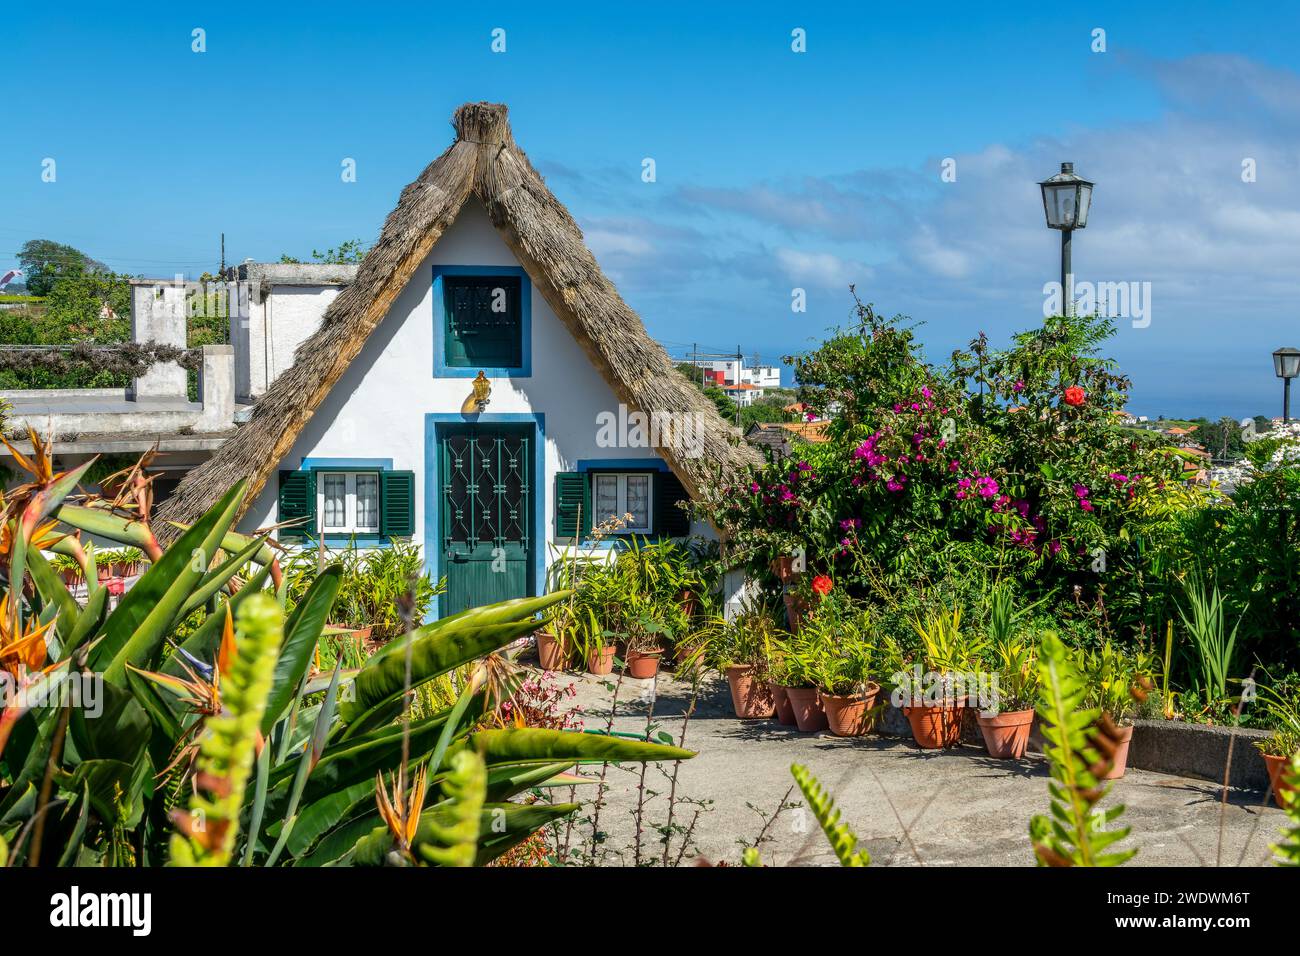 Traditional triangular madeiran house in the island of Madeira, Portugal Stock Photo